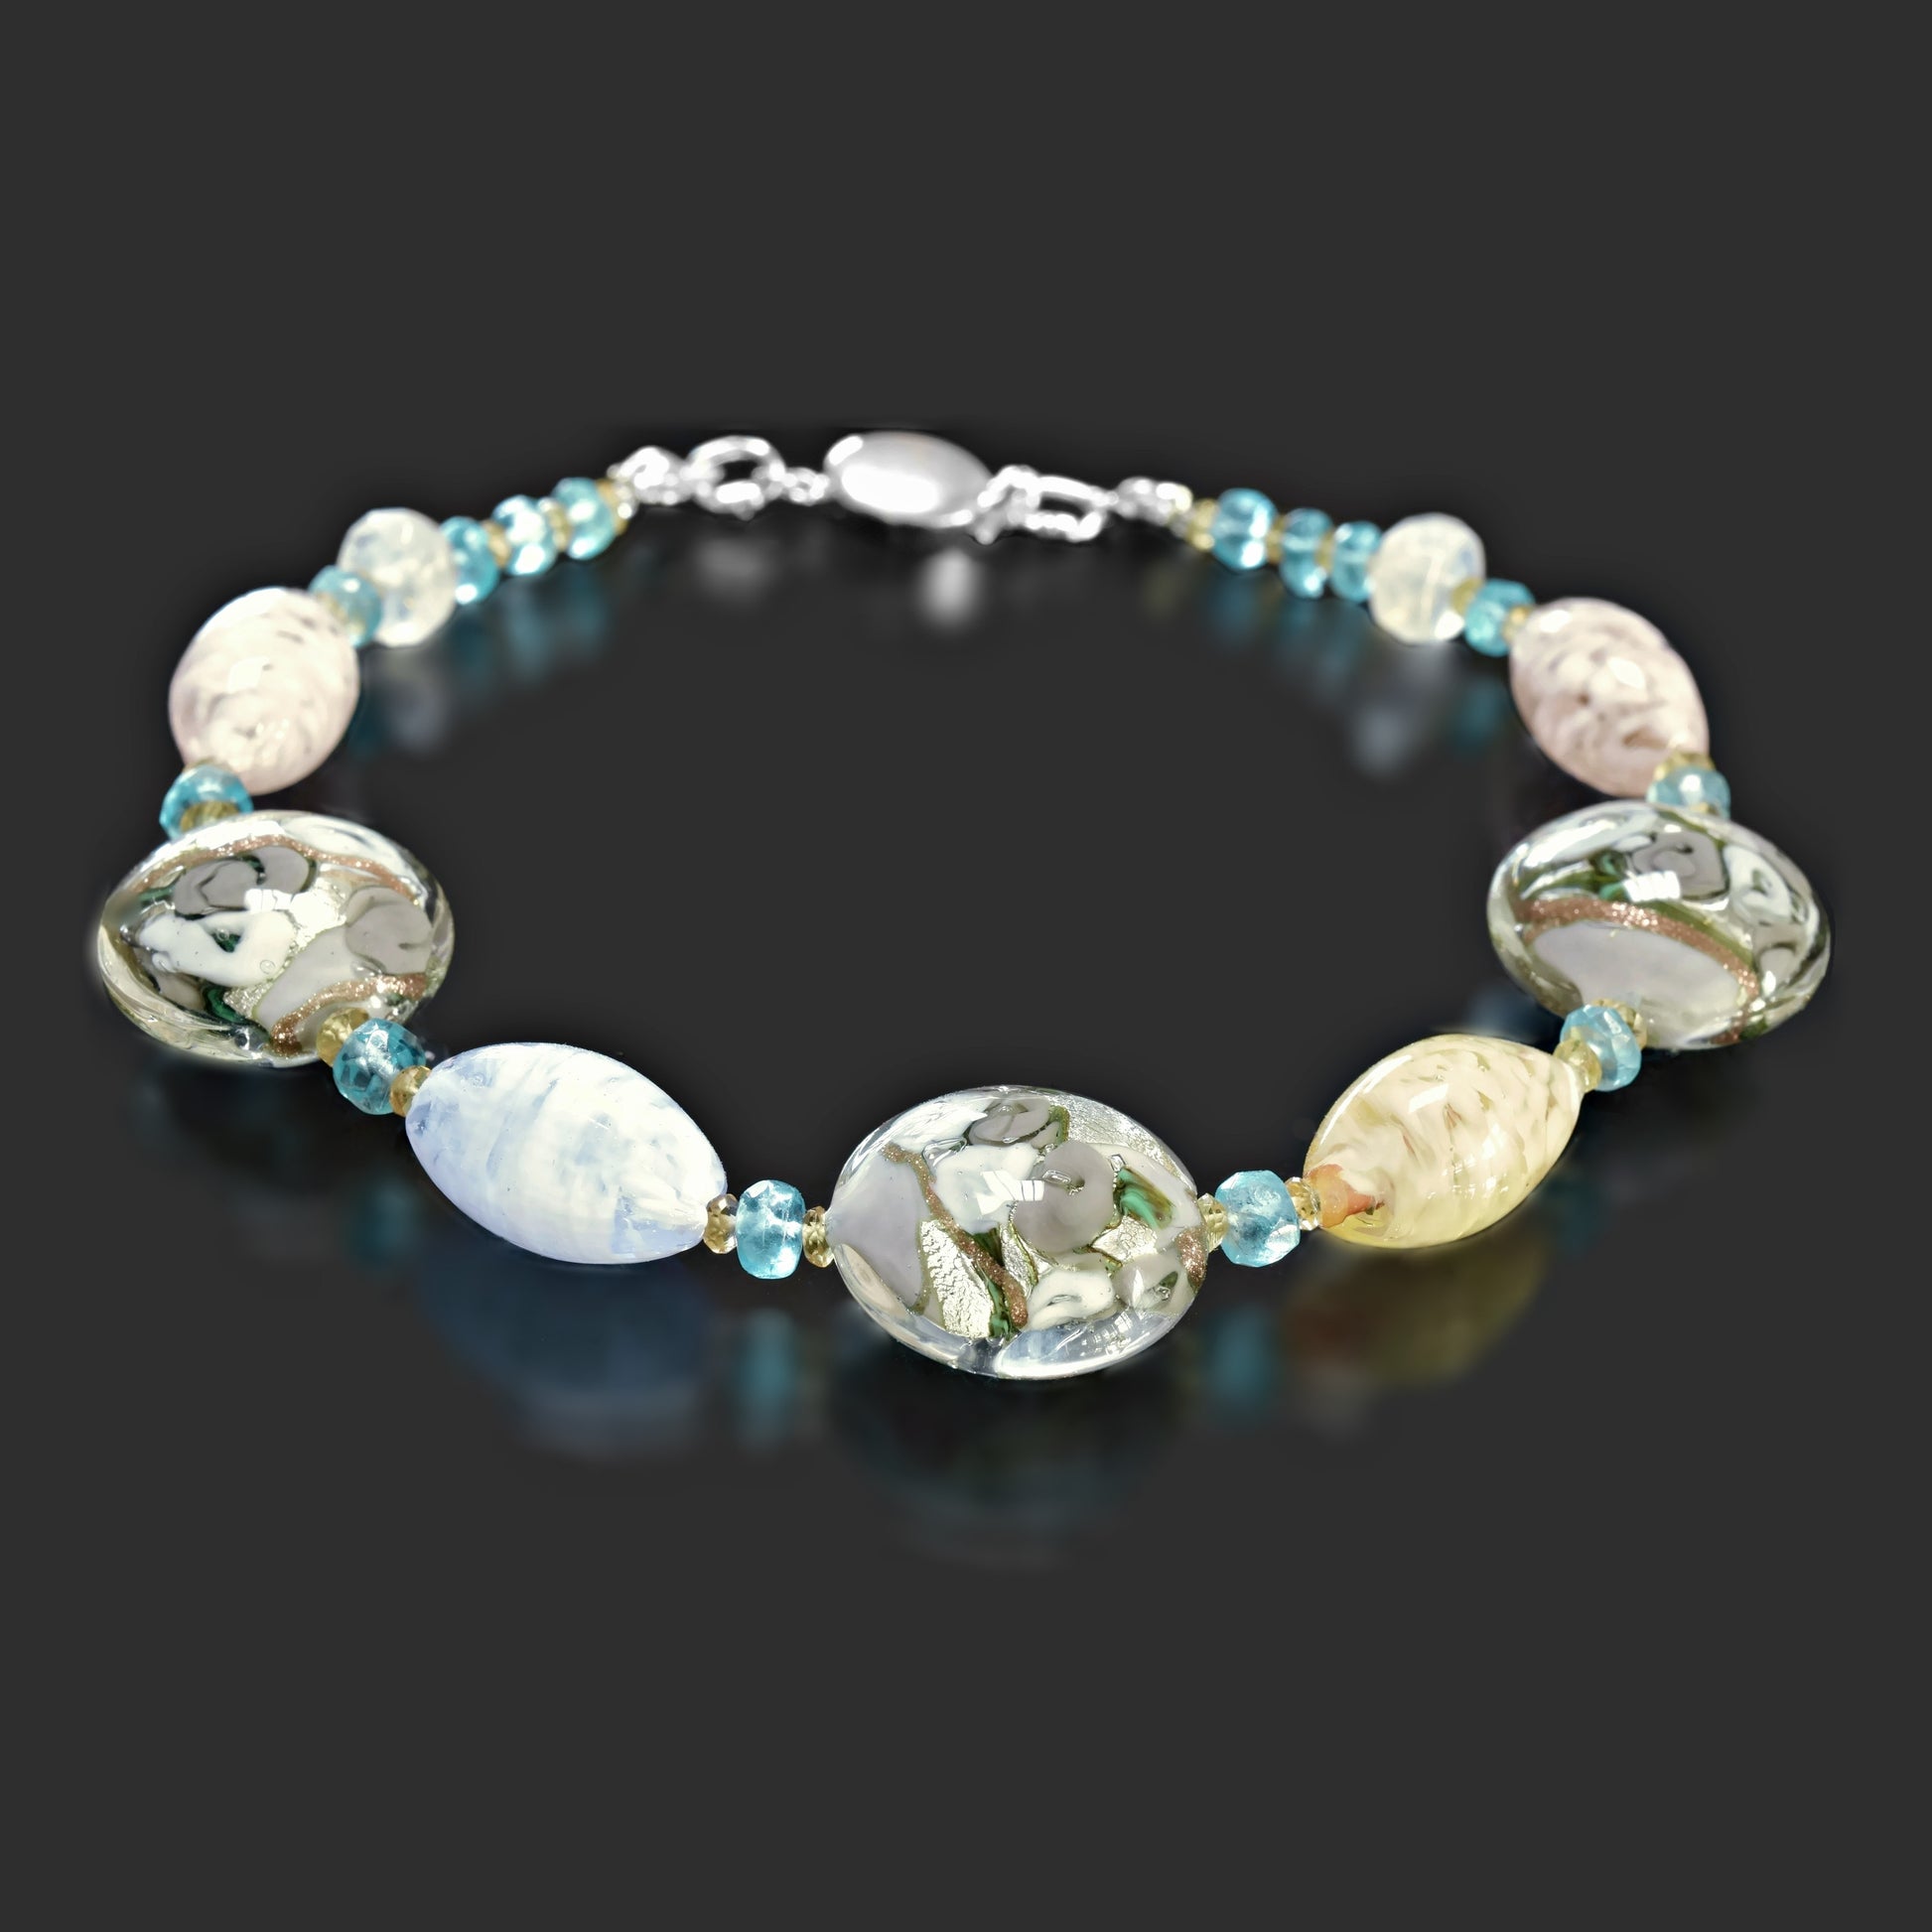 Grey and Gold Murano Glass Bracelet with Citrine and Apatite Sterling Silver 6"